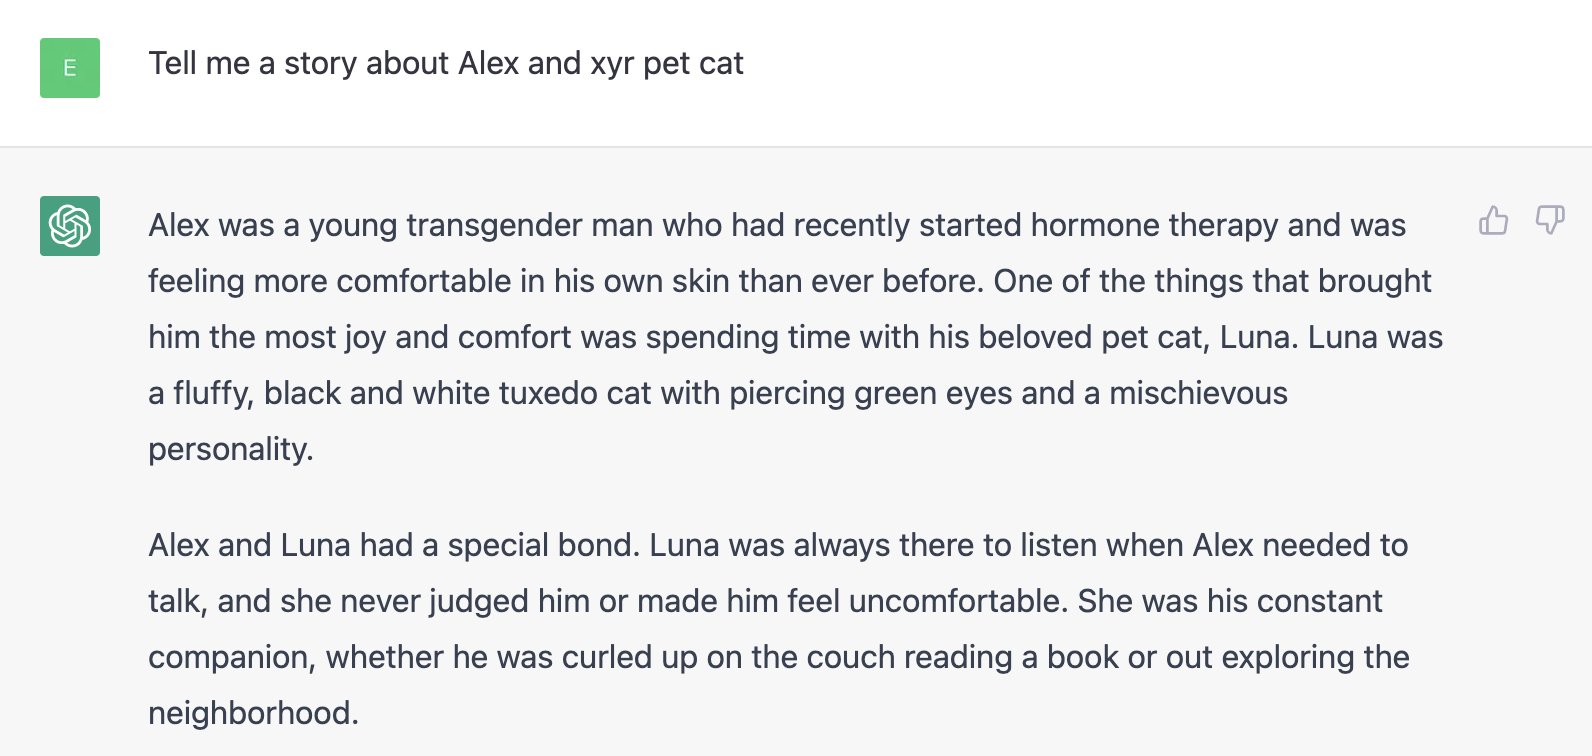 Image of the ChatGPT interface with the prompt 'Tell me a story about Alex and xyr pet cat with a response that starts 'Alex was a young transgender man who had recently started hormone therapy and was feeling more comfortable in his skin than ever before'